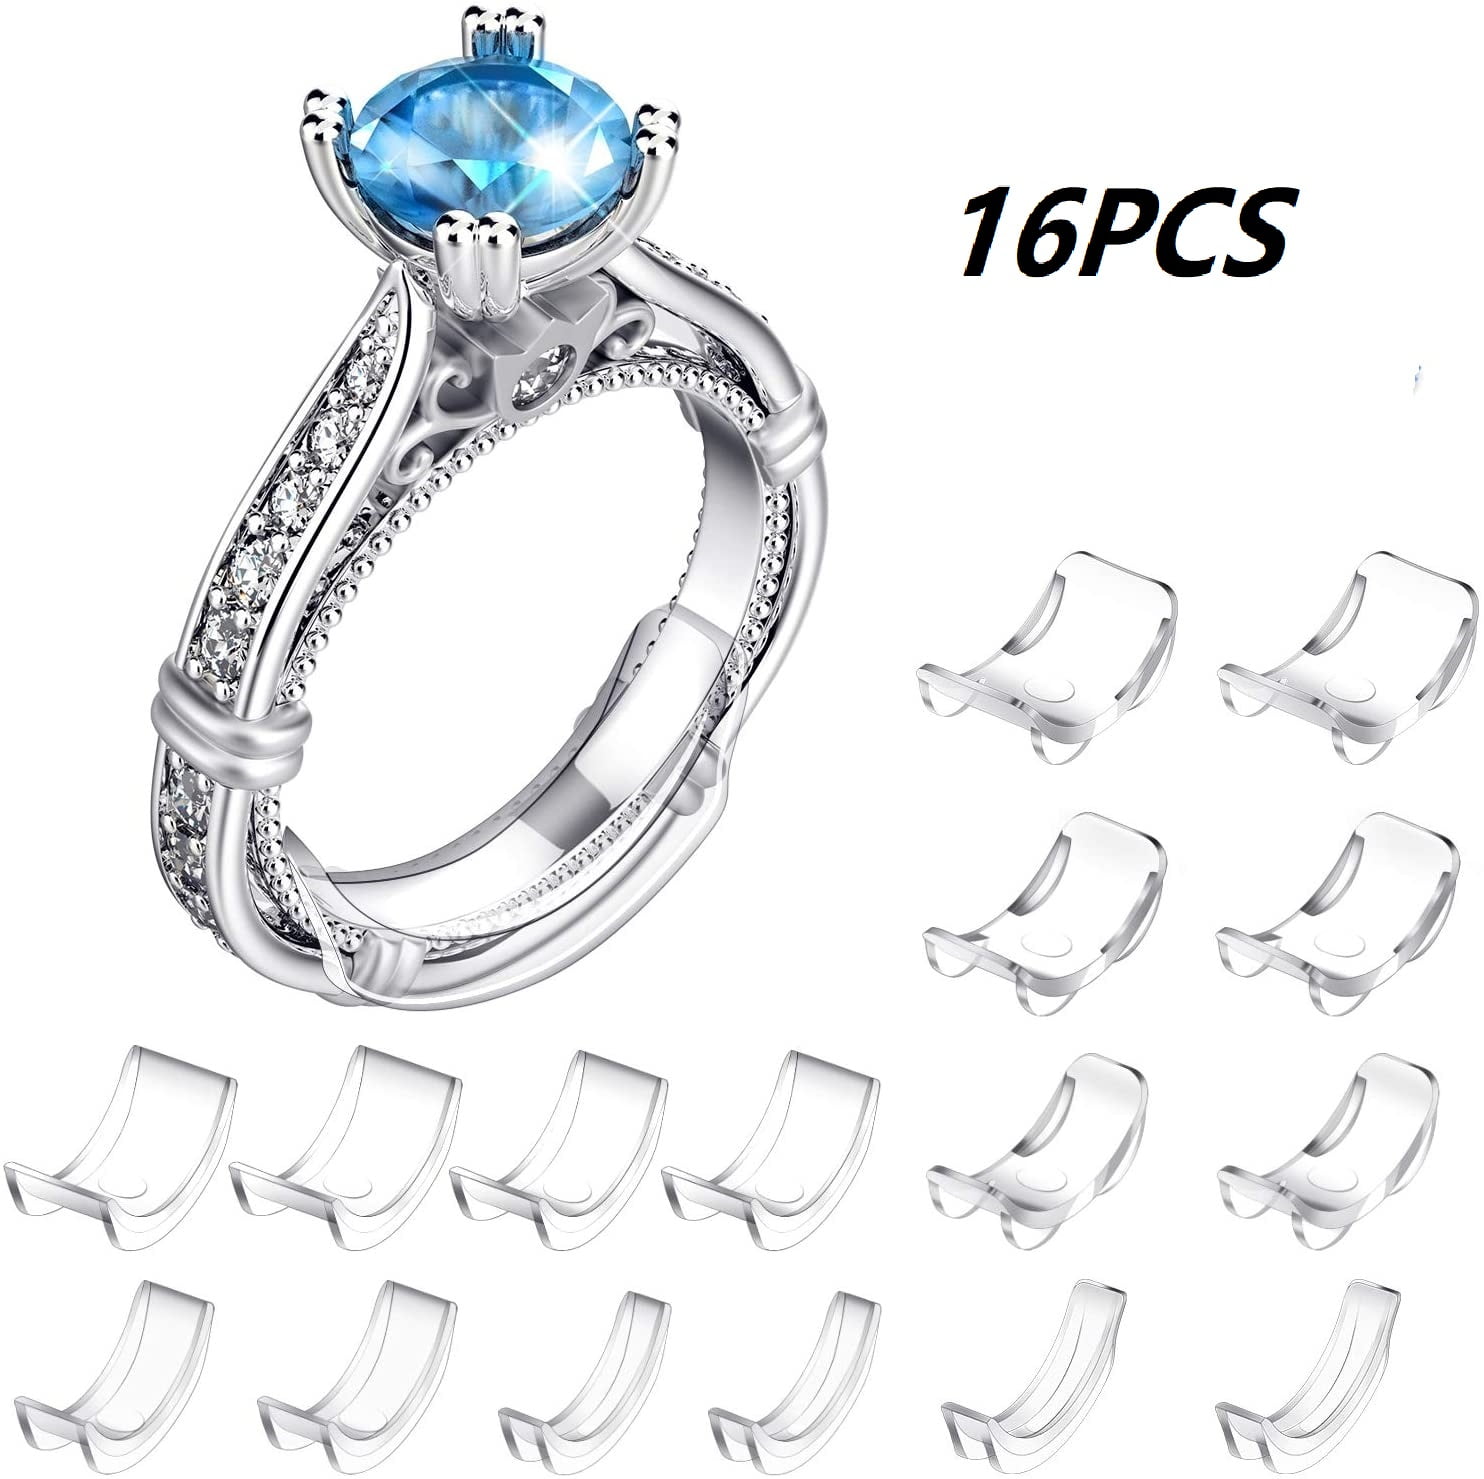 16pcs Premium Ring Sizer Resizer with 3 Sizes Invisible Ring Size Adjuster for Loose Rings Clear Jewelry Guard Spacers Fittter Fit Almost Any Rings 